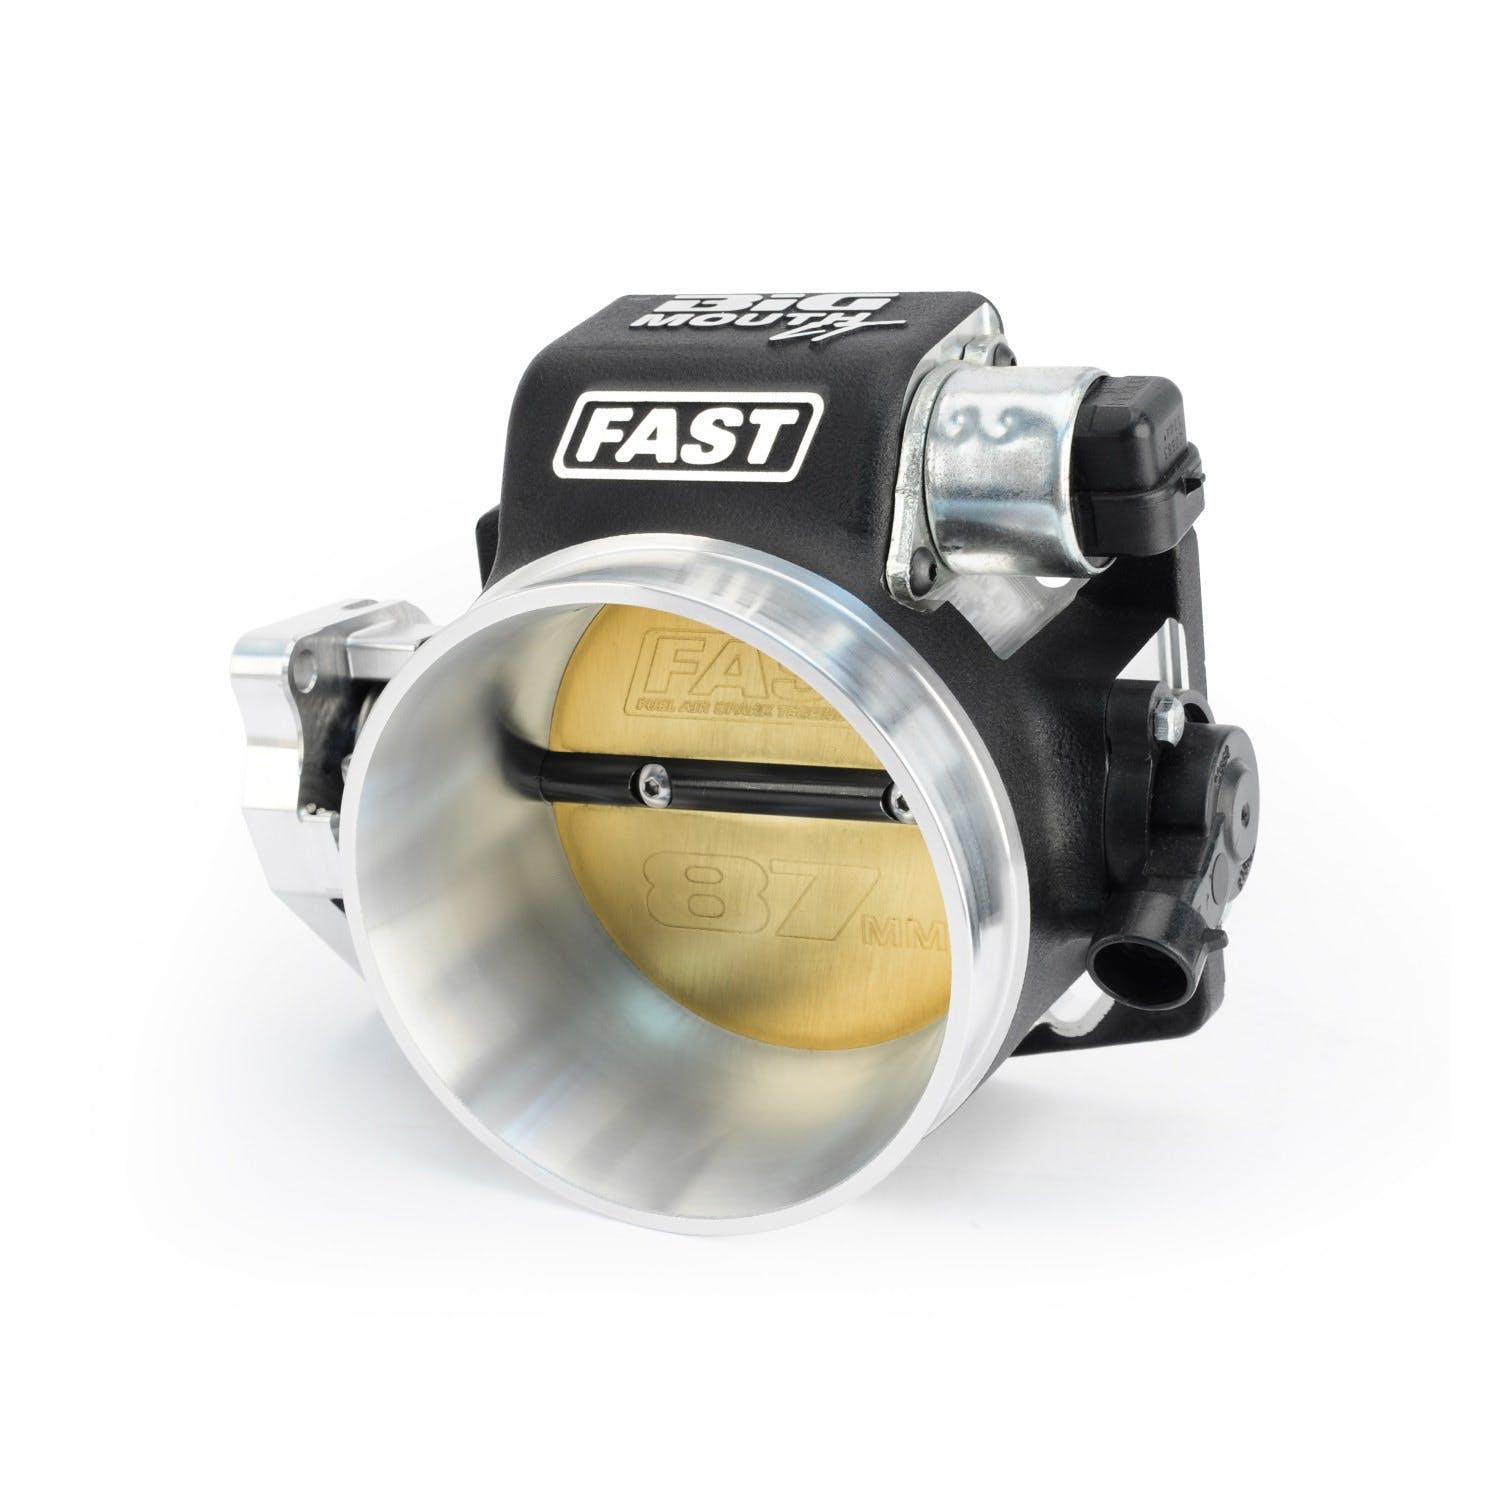 FAST - Fuel Air Spark Technology 54089 Fuel Injection Throttle Body